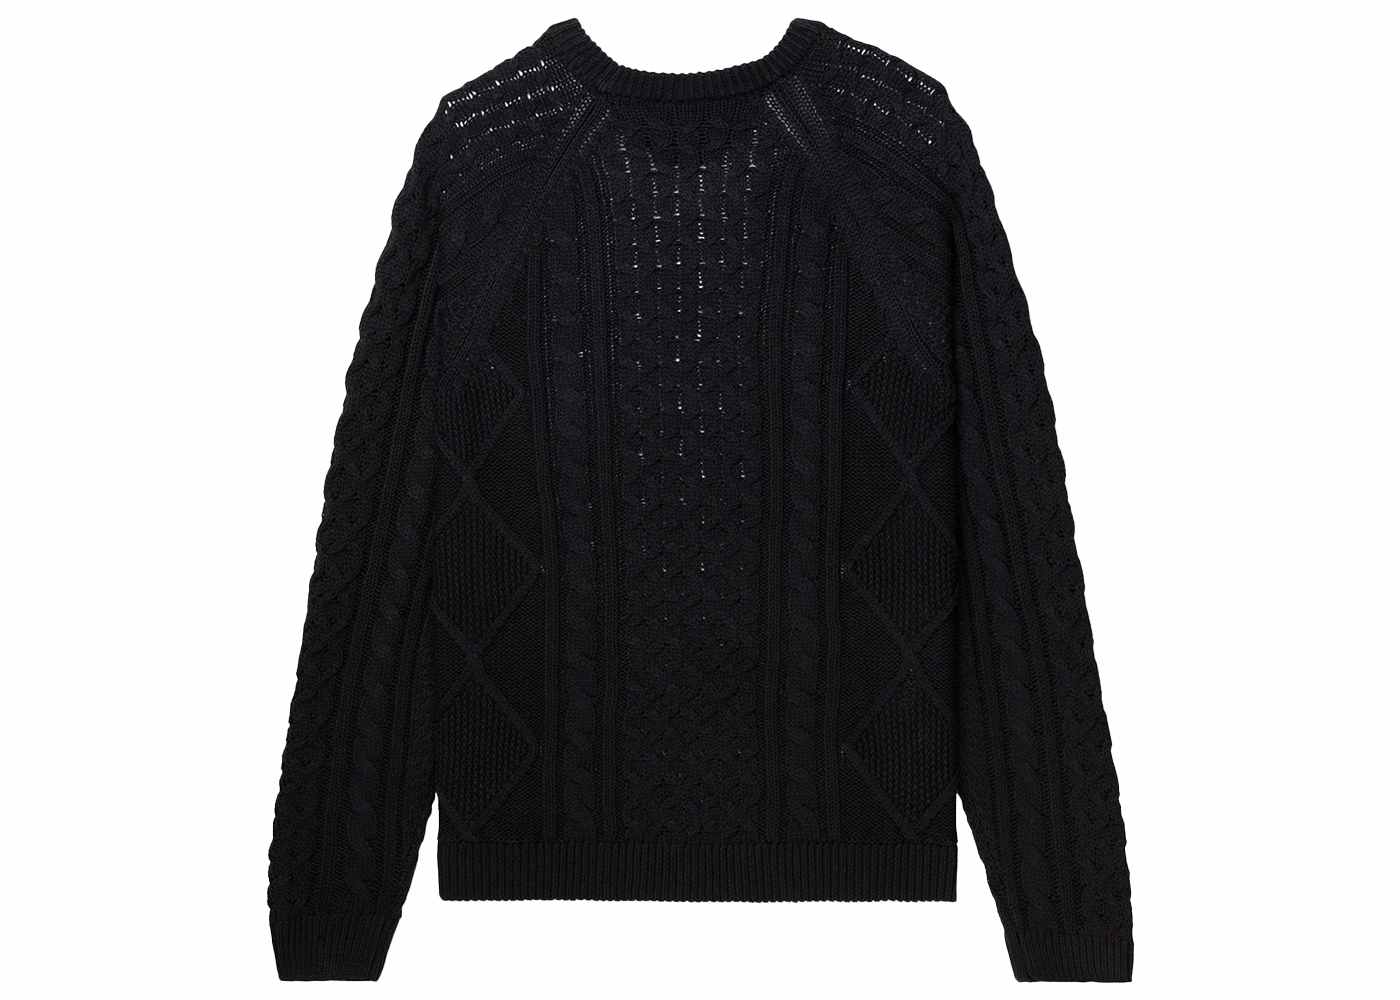 Nike Cable Knit L/S Sweater (US Sizing) Black Men's - FW23 - US